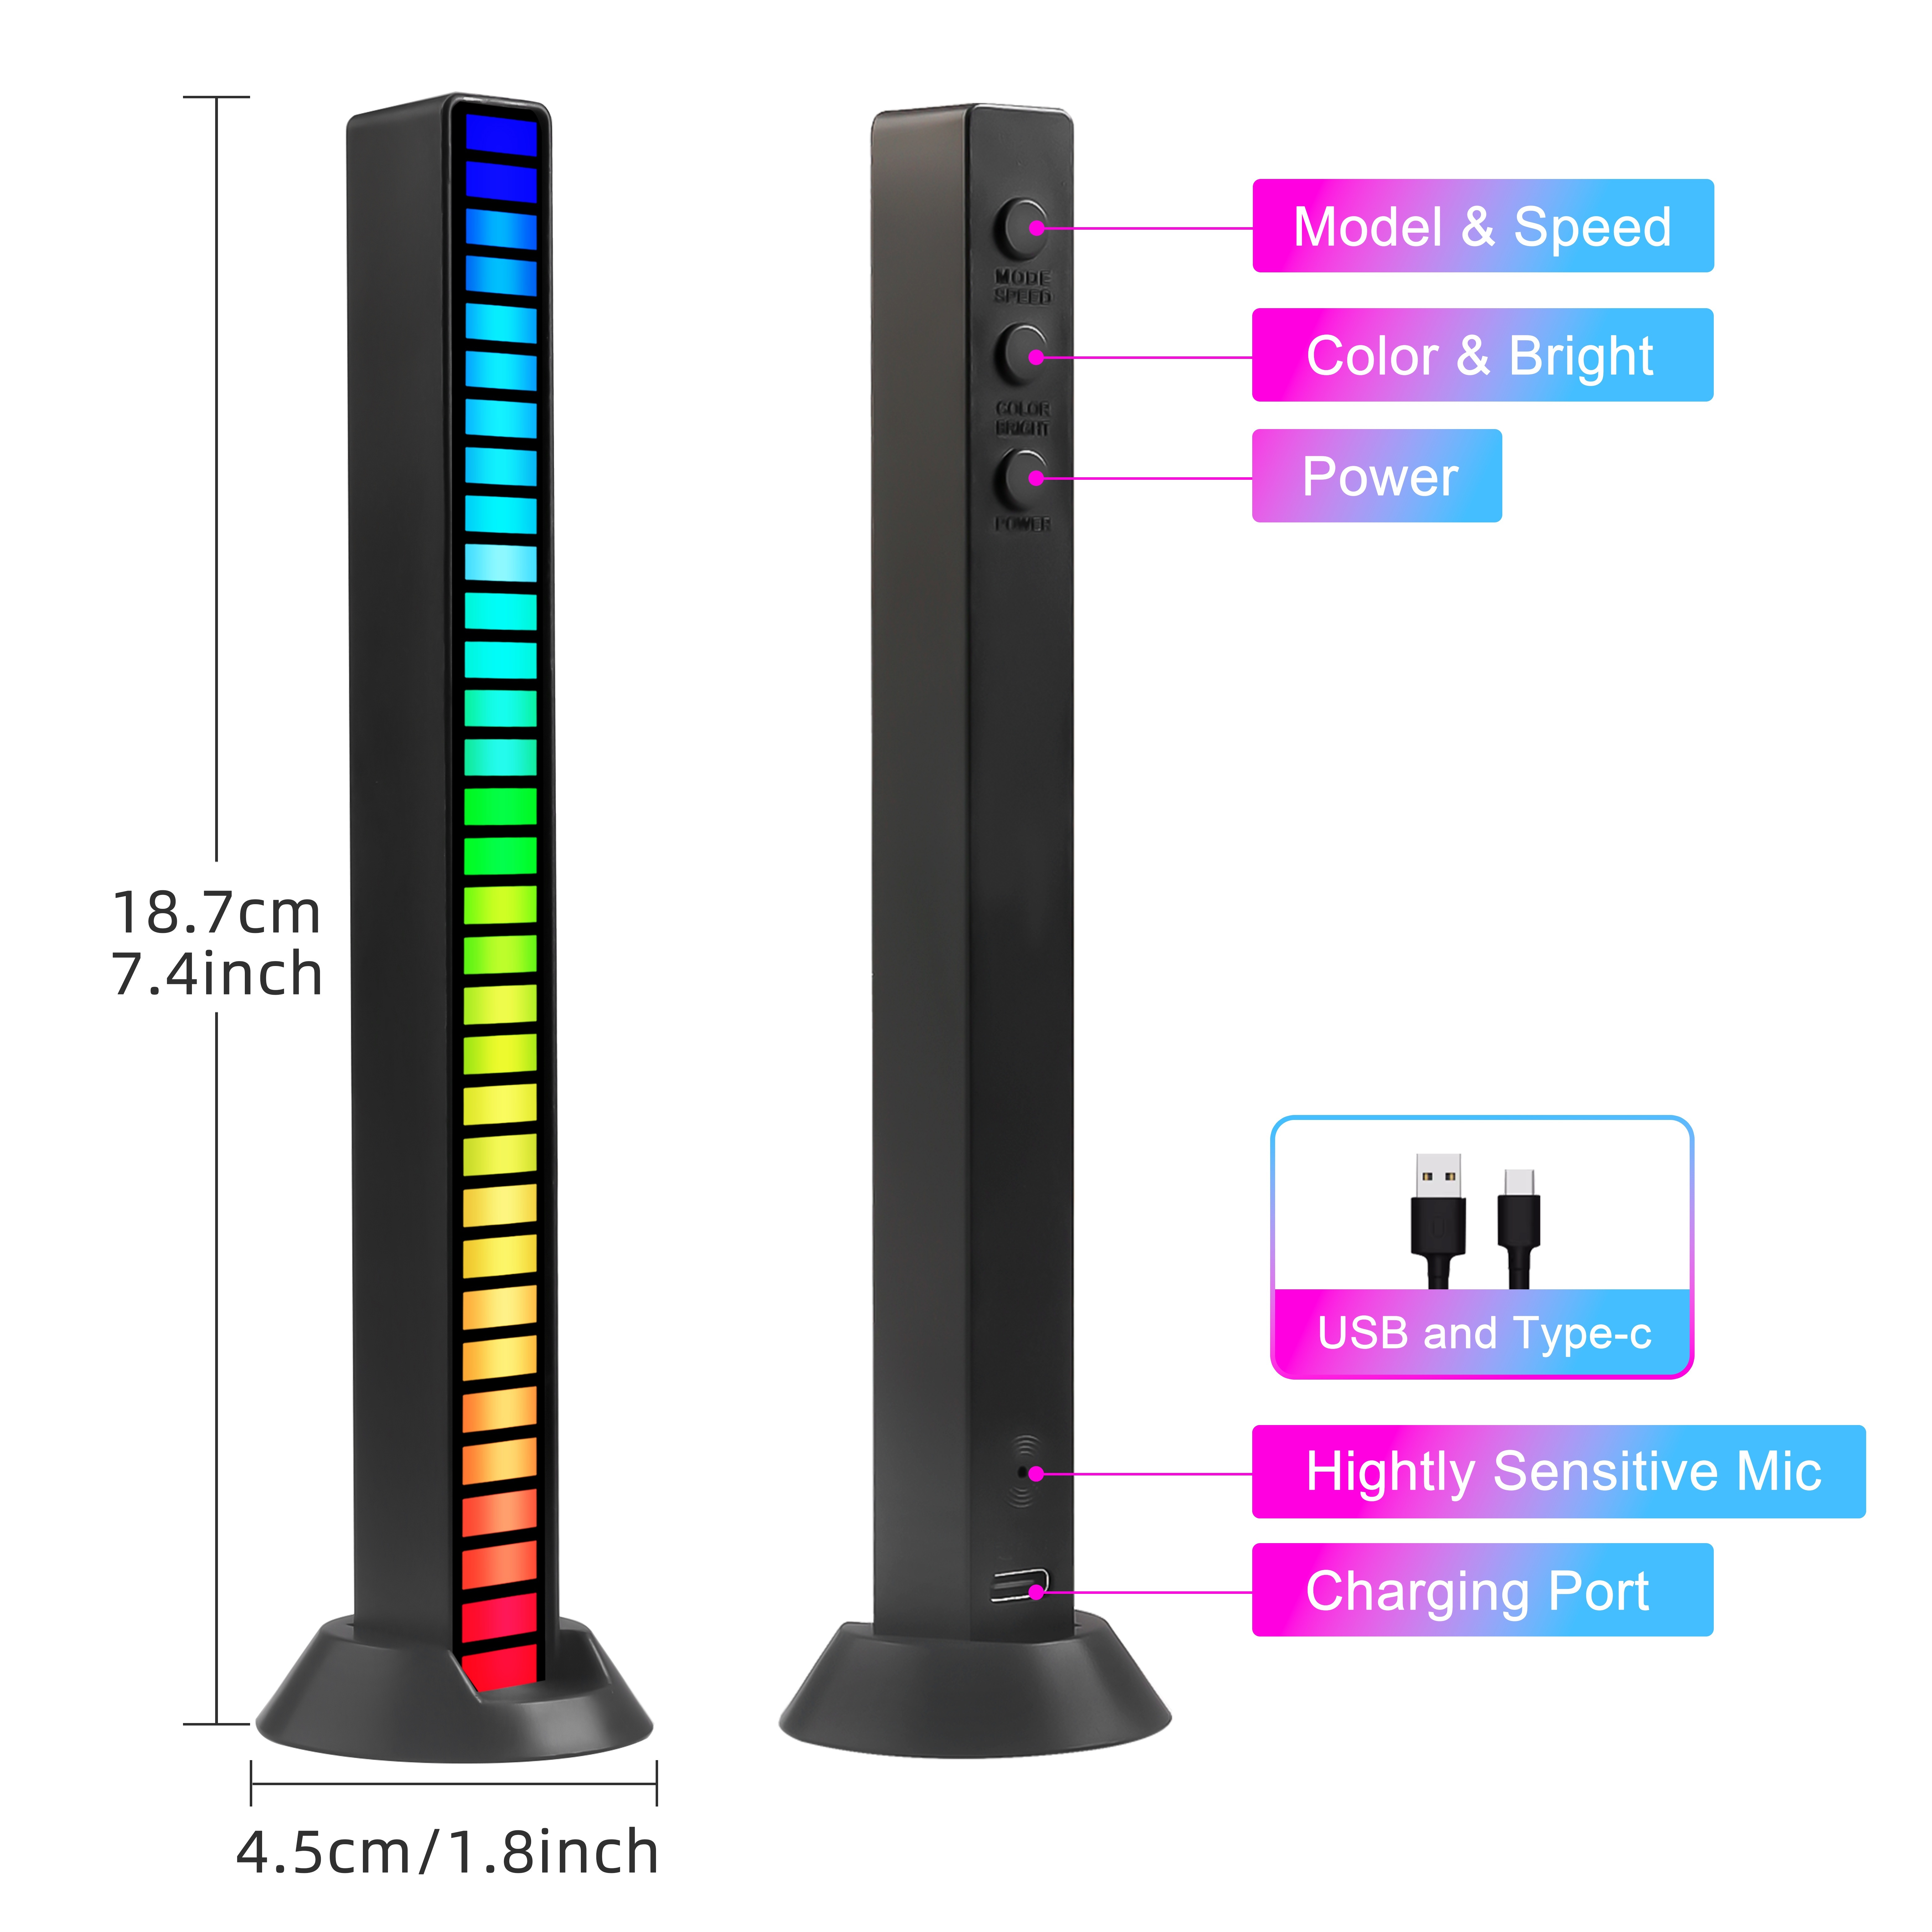 2pcs Sound Activated Lights, 32 Bit Sound Control RGB Light Bar, Colorful  Rechargeable Ambient Led Light, Voice-Activated Pickup Rhythm Music RGB Ligh